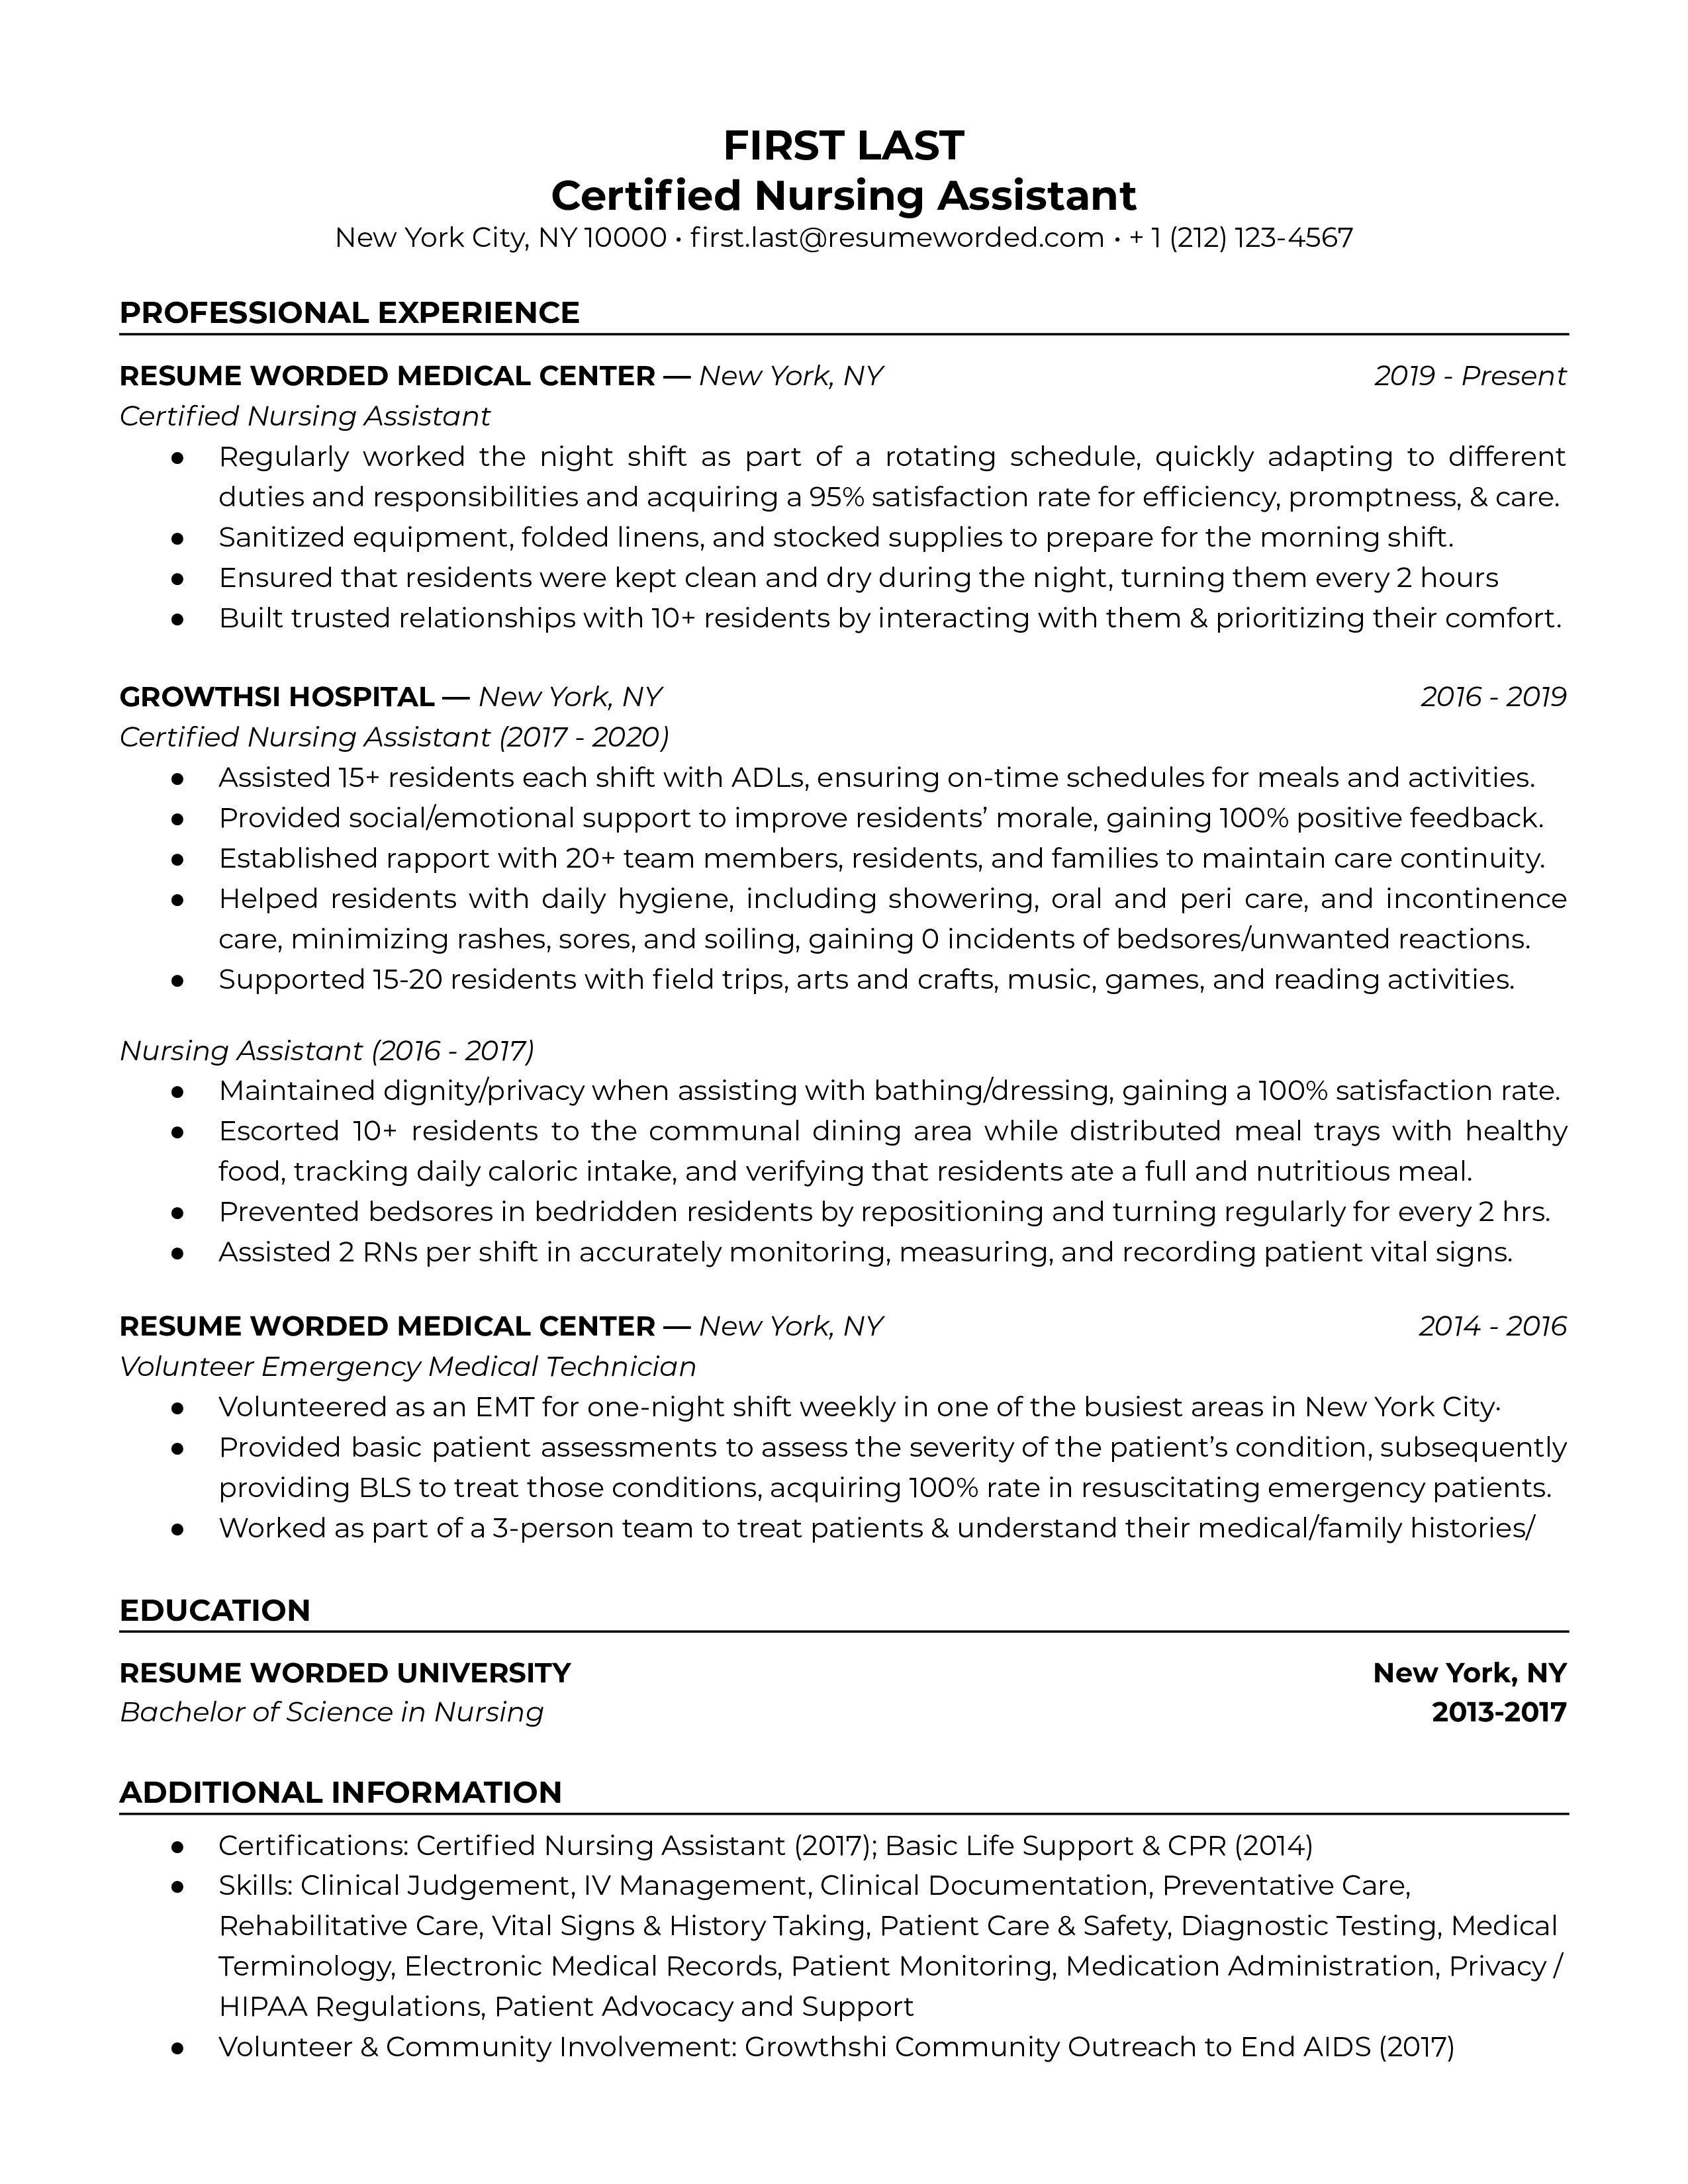 Certified Nursing Assistant Resume Template + Example